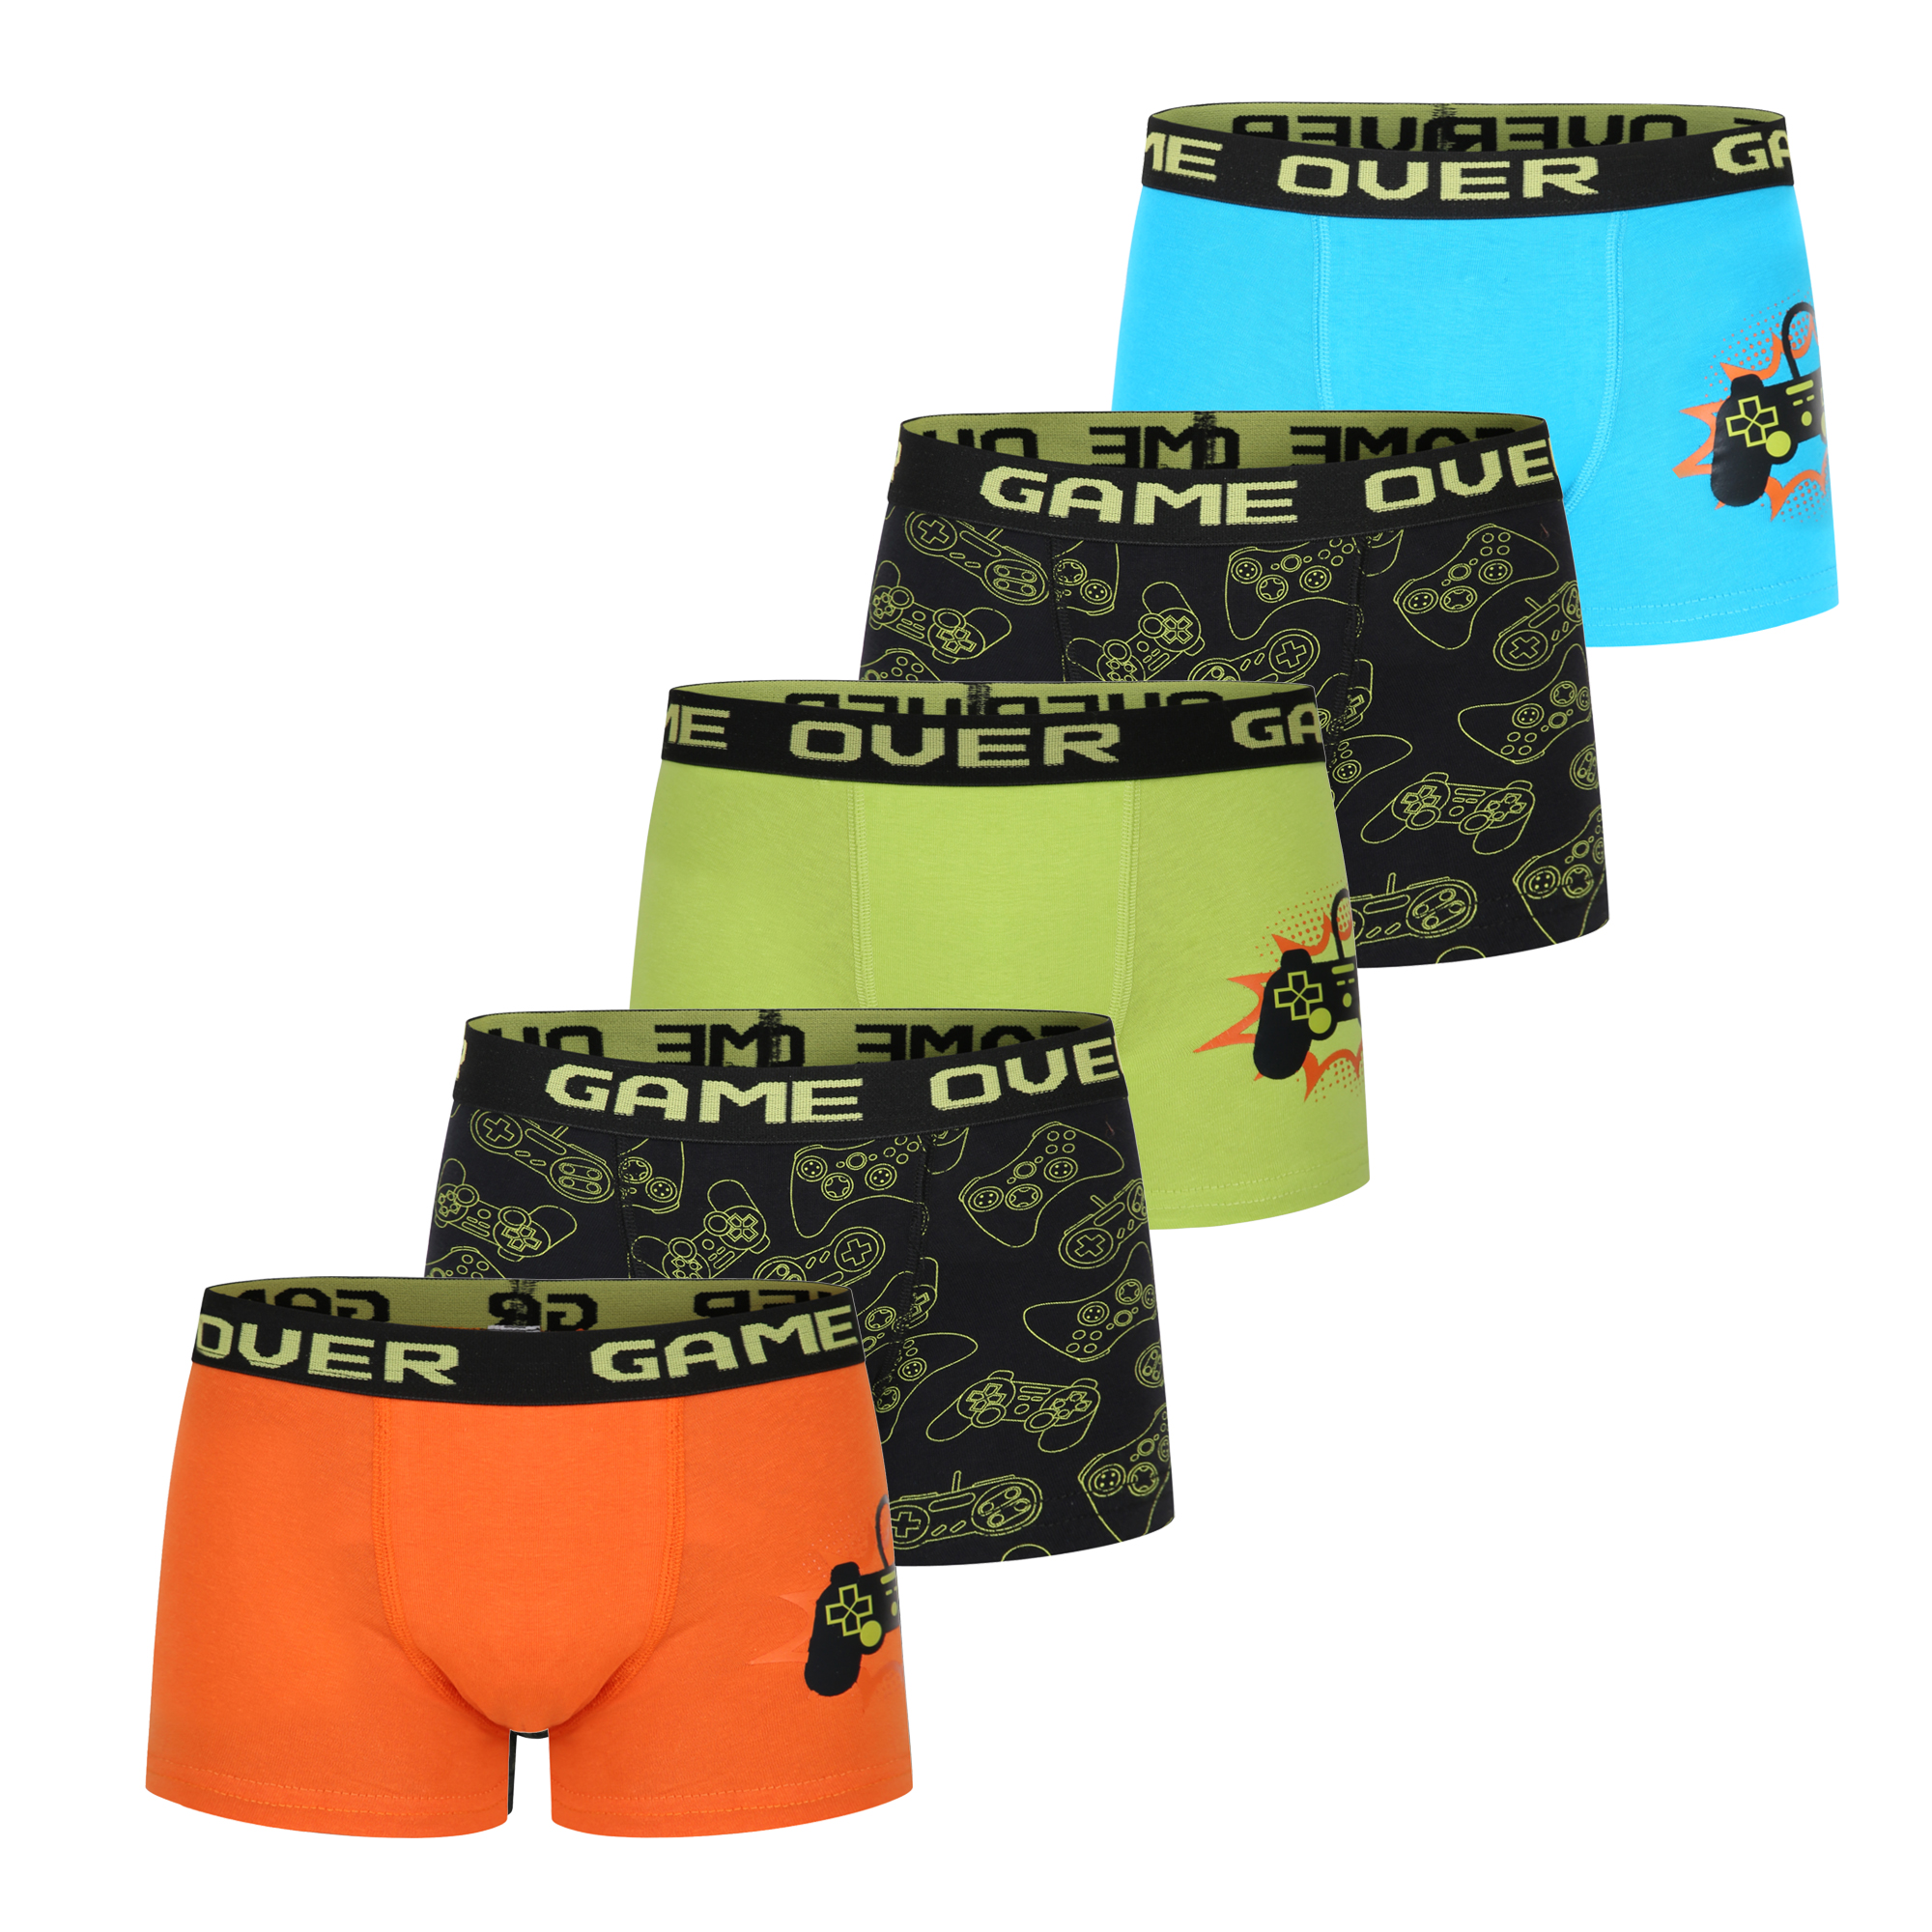 Boys Boxers 5 Pack Trunks Underwear Camo Gaming Design Coloured